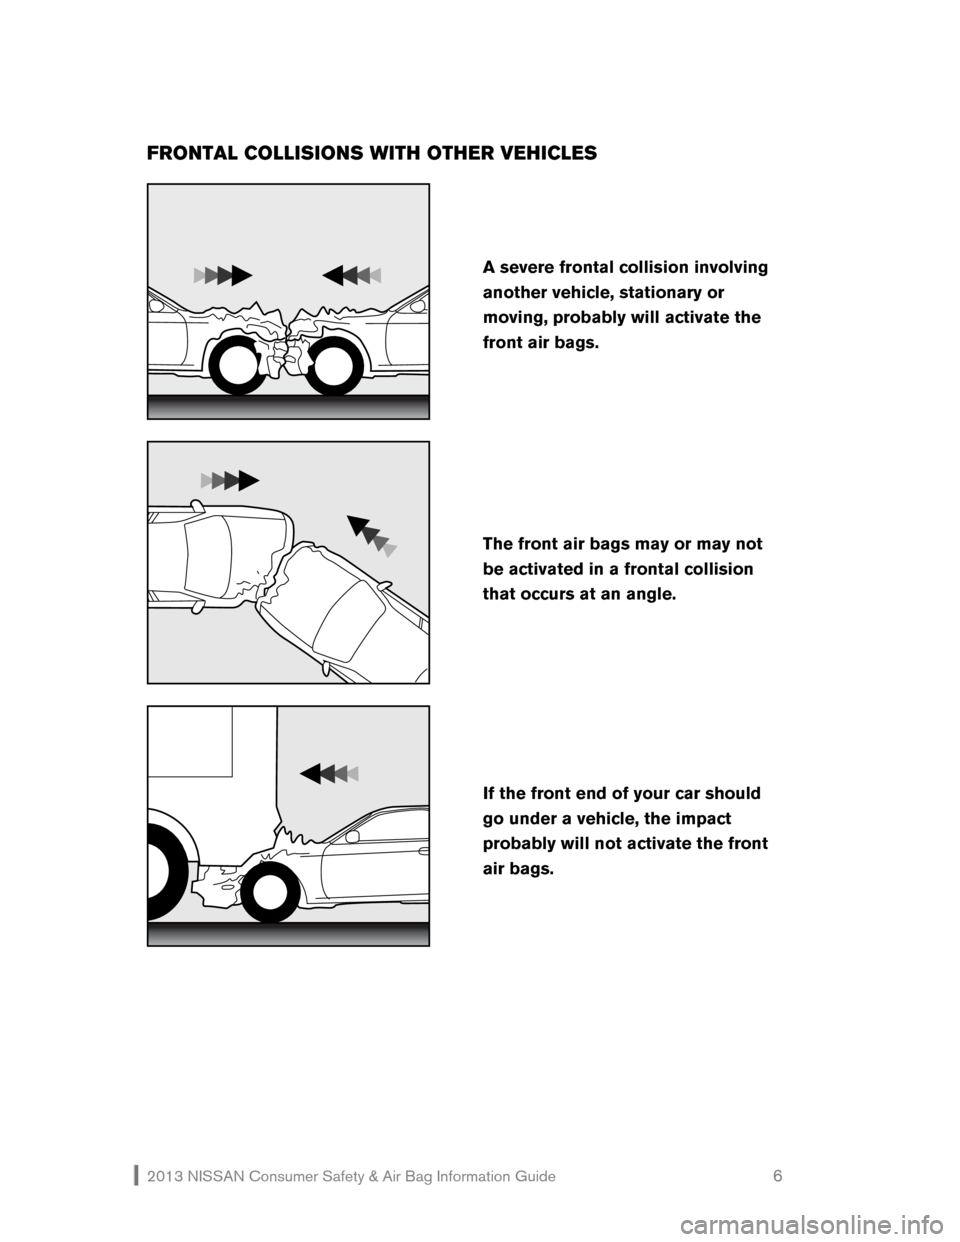 NISSAN PATHFINDER 2013 R52 / 4.G Consumer Safety Air Bag Information Guide 2013 NISSAN Consumer Safety & Air Bag Information Guide                                                   6 
FRONTAL COLLISIONS WITH OTHER VEHICLES 
 
 
 
 
If the front end of your car should 
go und